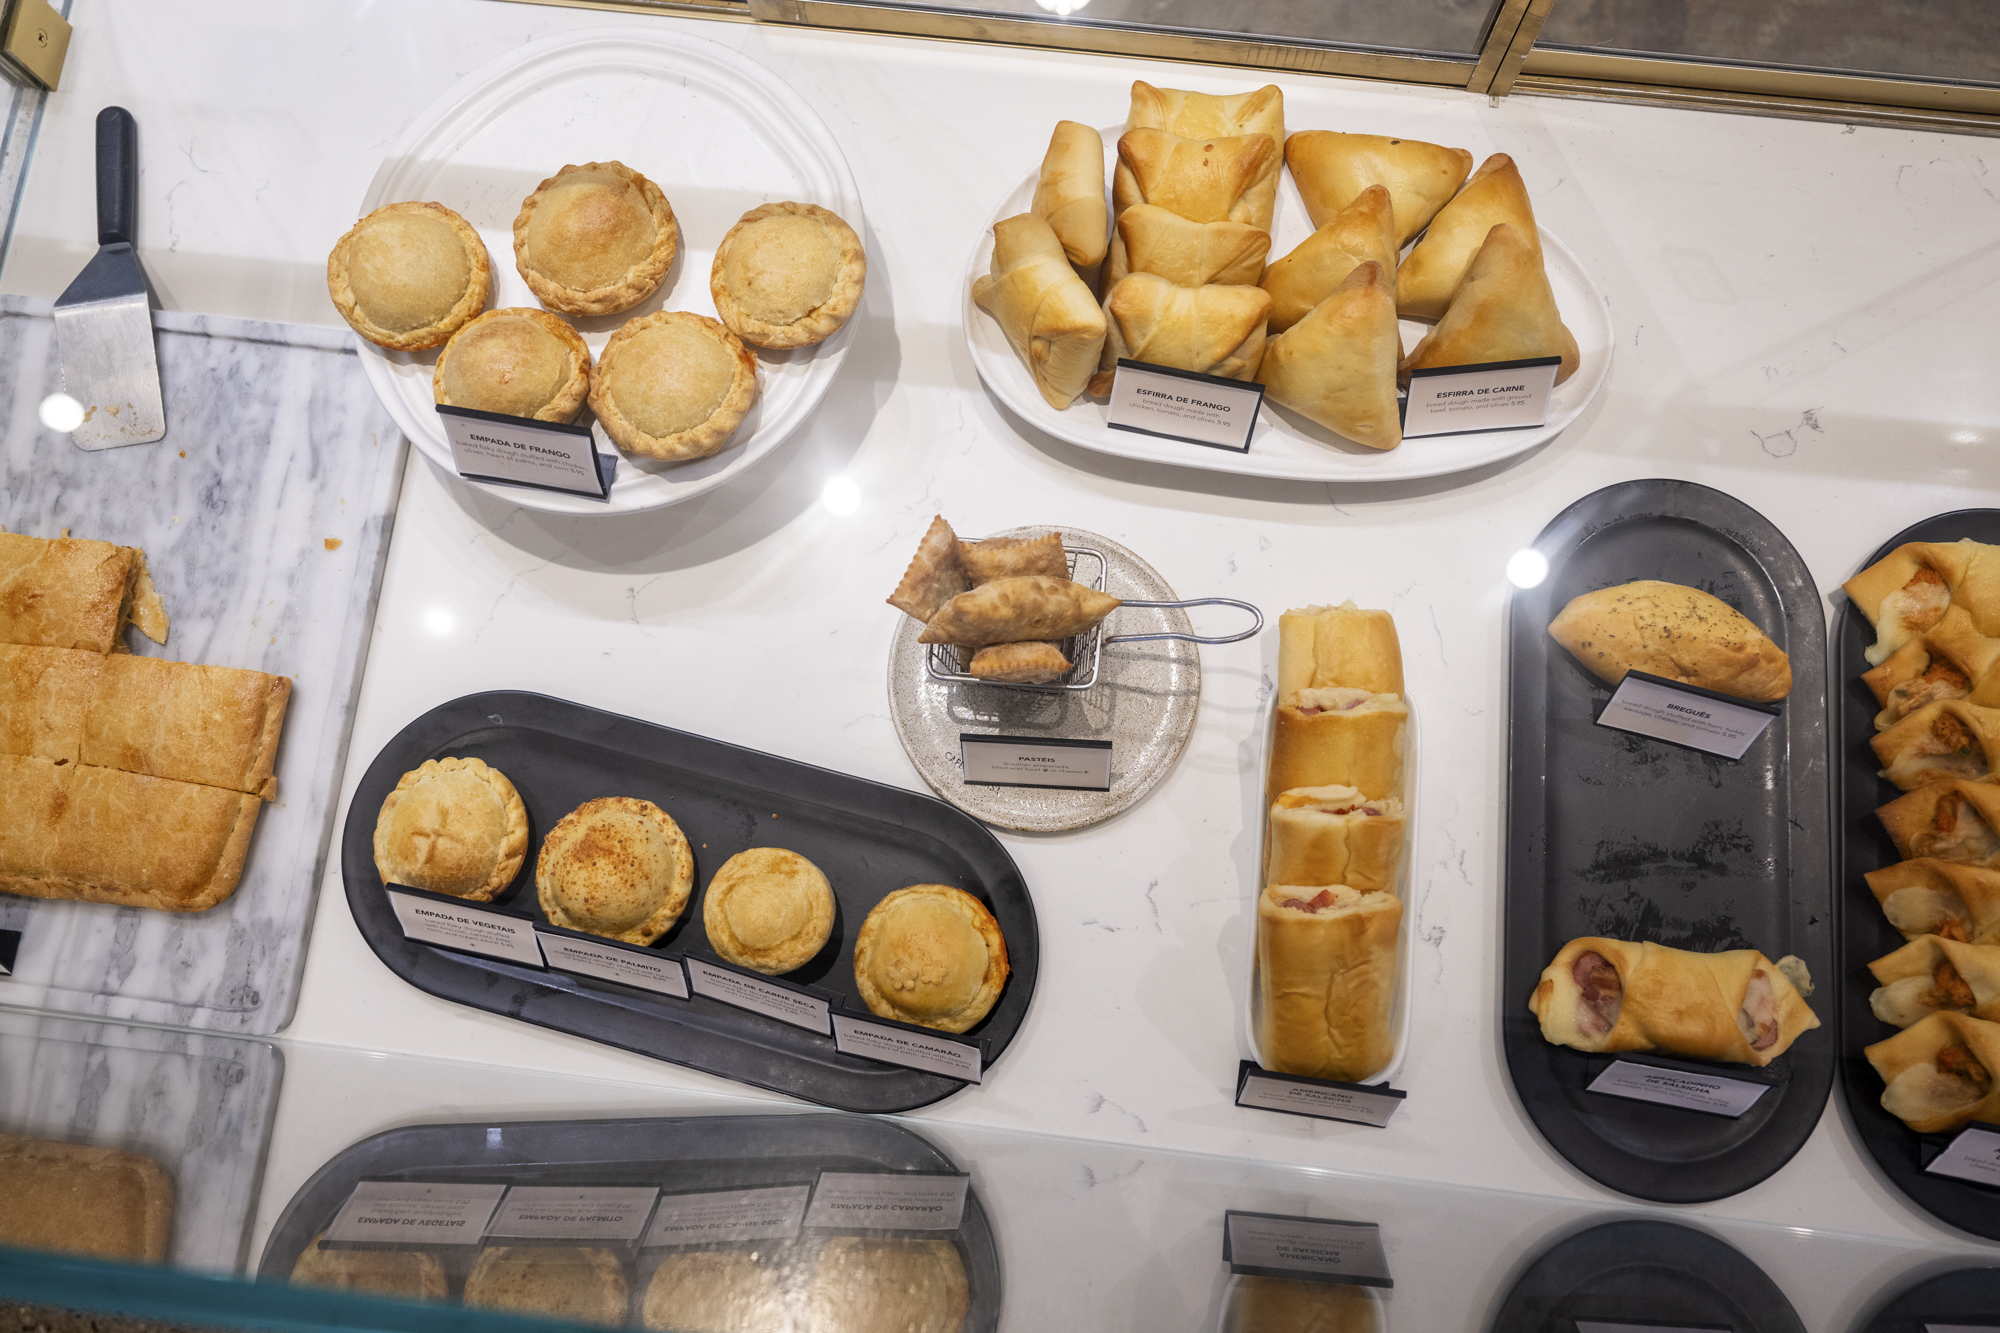 A spread of pastries inside a display case.